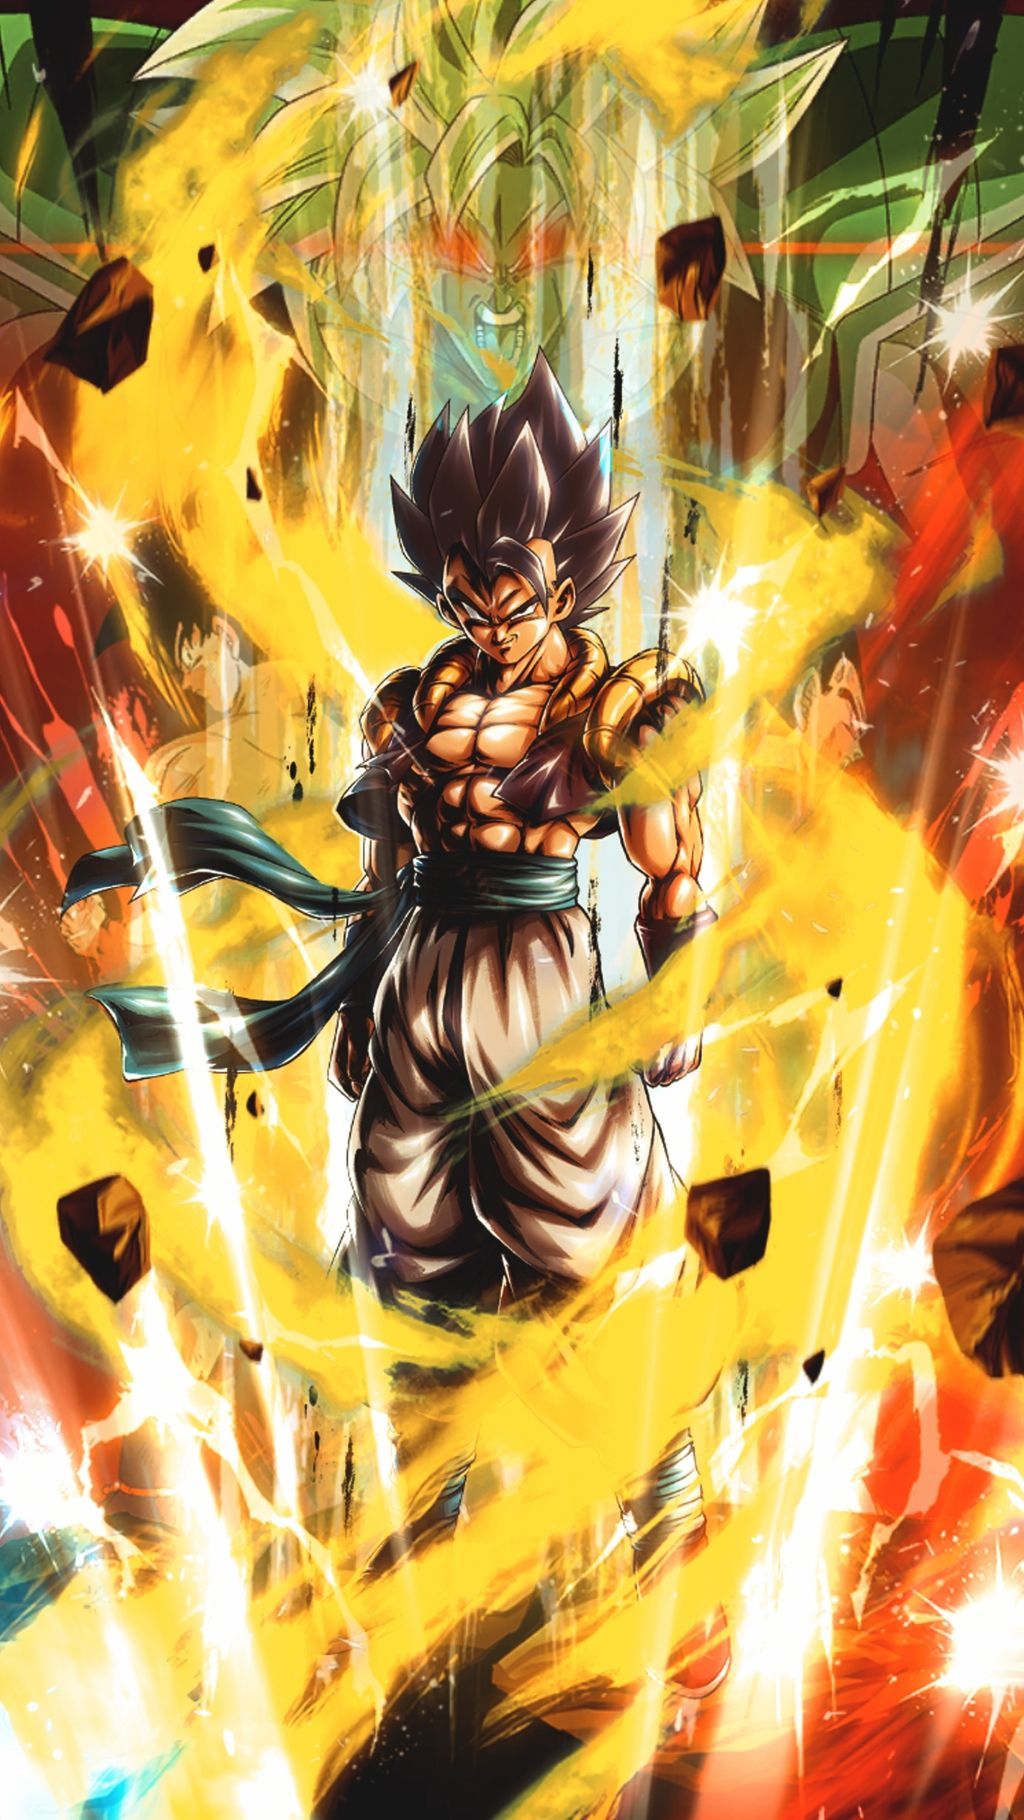 4K Wallpaper of DBZ and Super for Phones. Dragon ball super artwork, Anime dragon ball super, Anime dragon ball